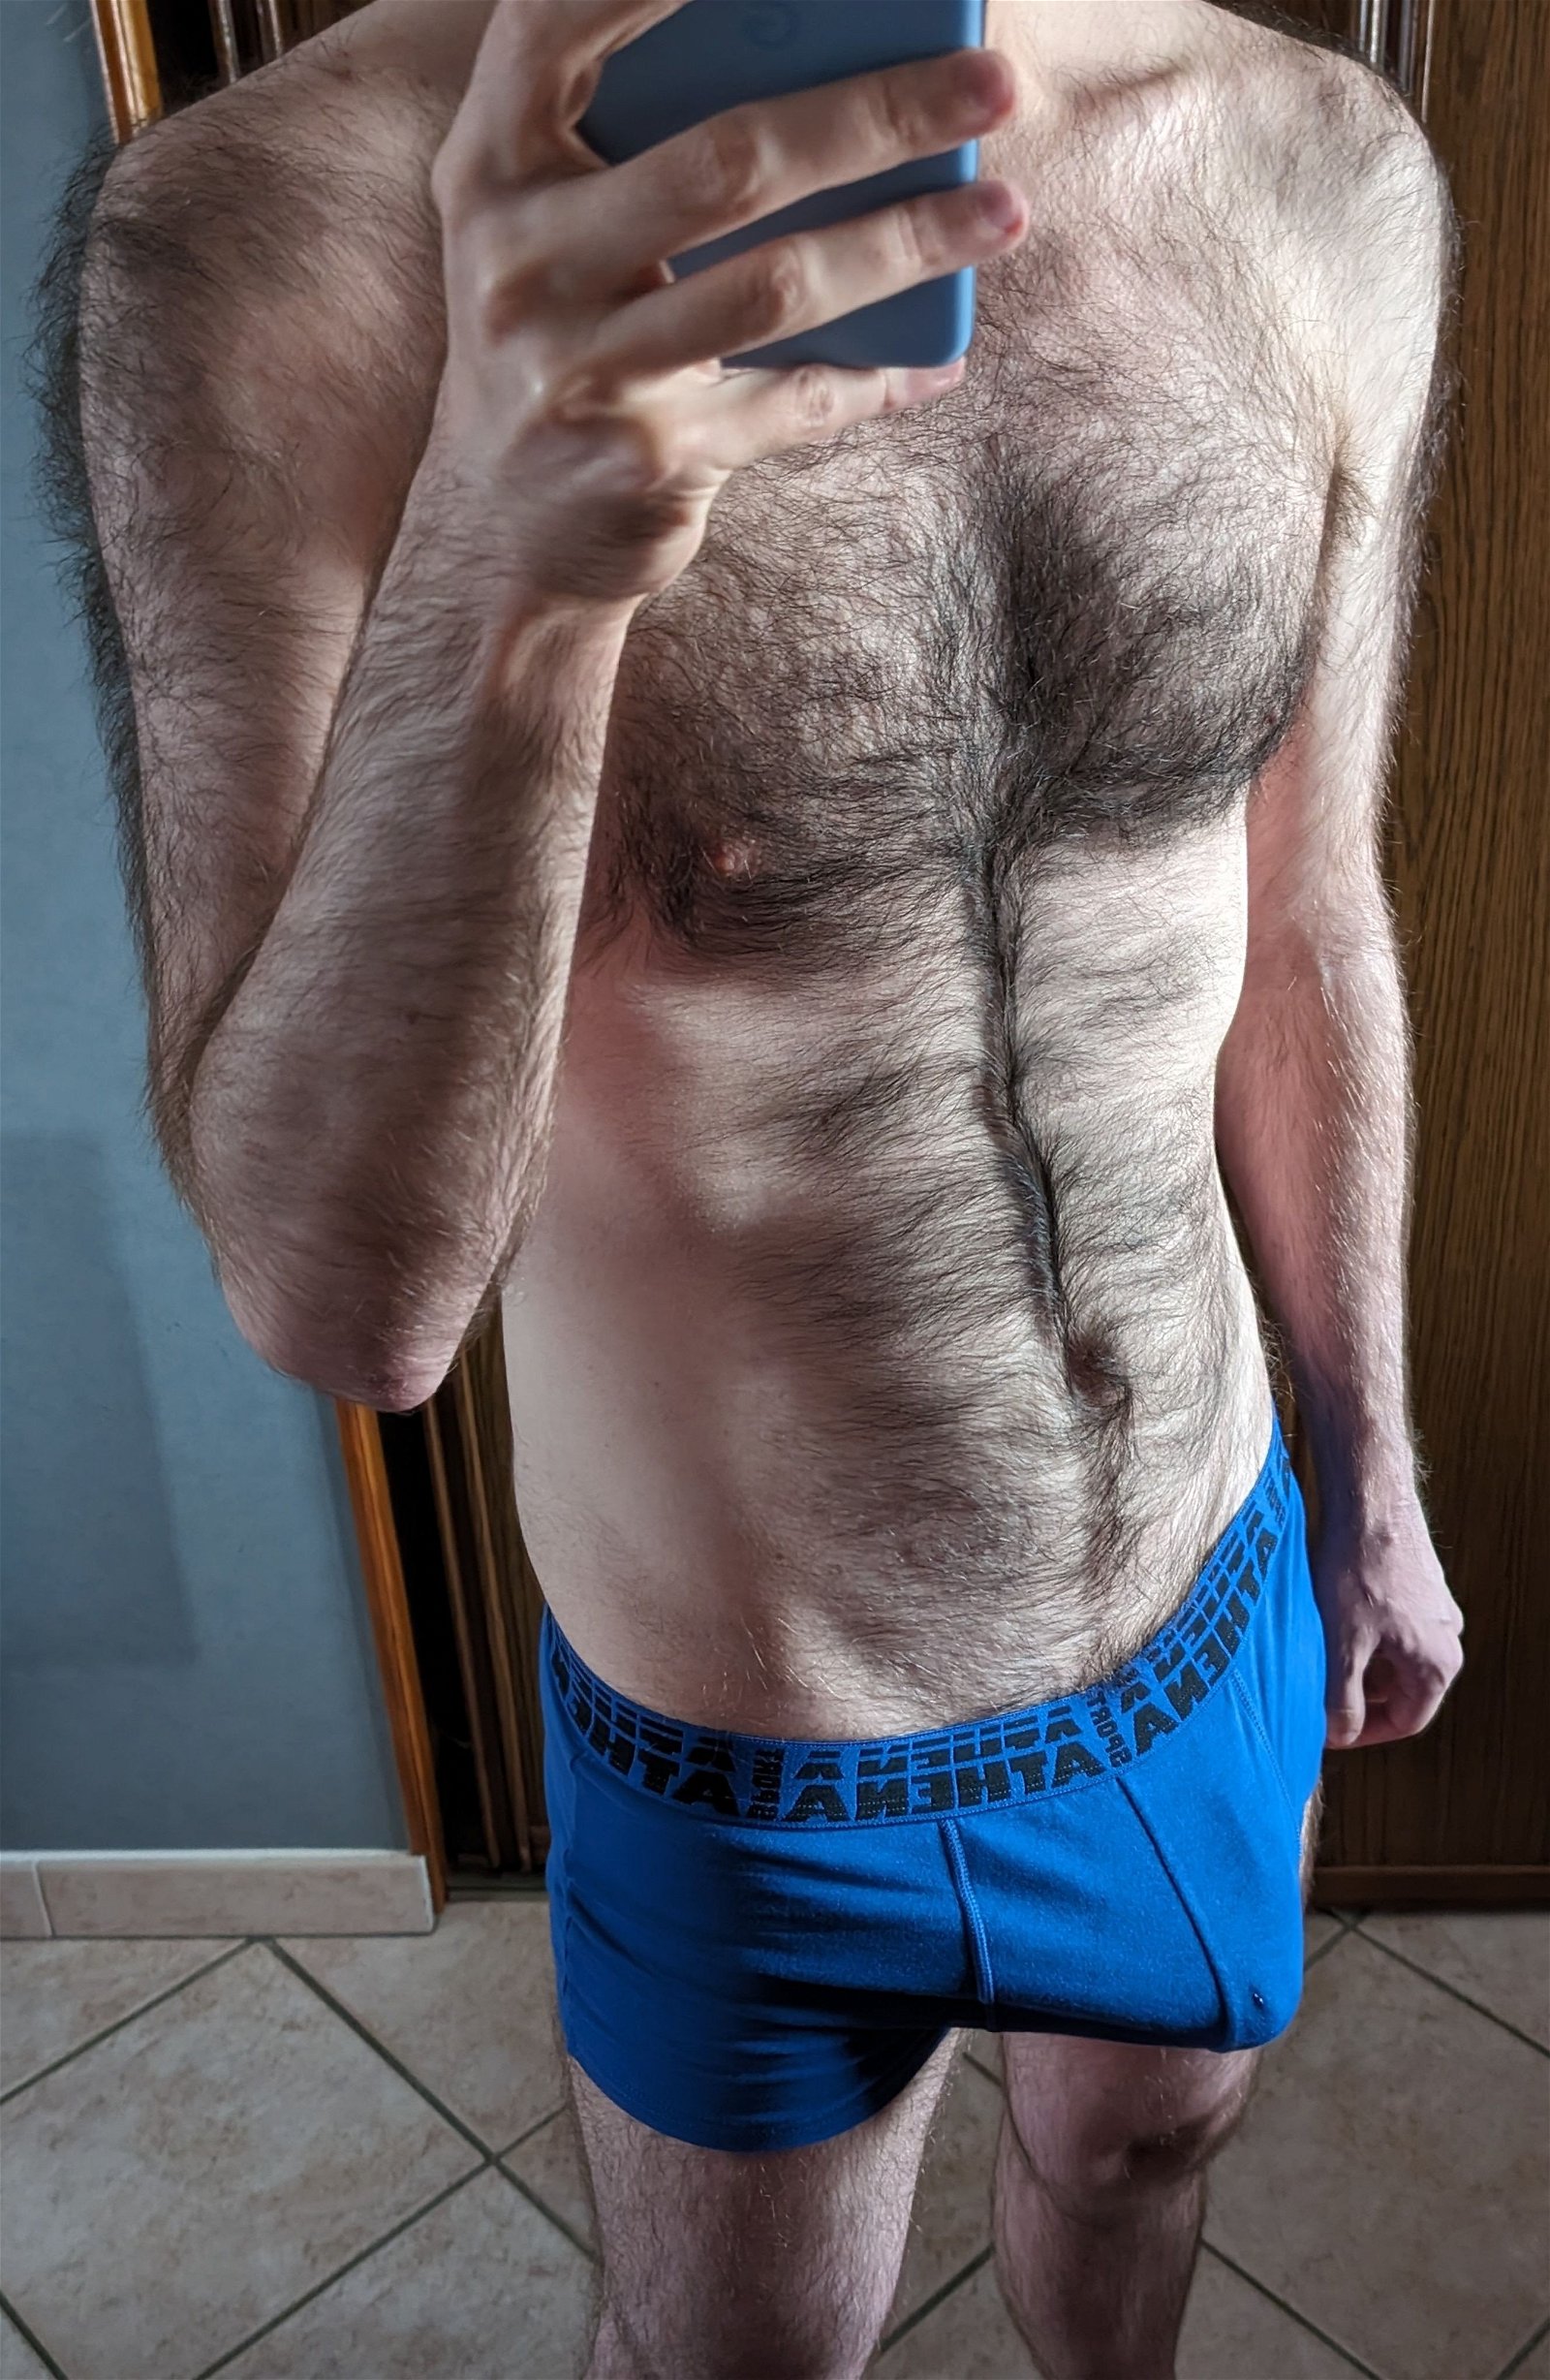 Watch the Photo by rblue with the username @rblue17, posted on February 10, 2024. The post is about the topic Gay. and the text says 'Mind looking at my hairy chest and wet dick today?'